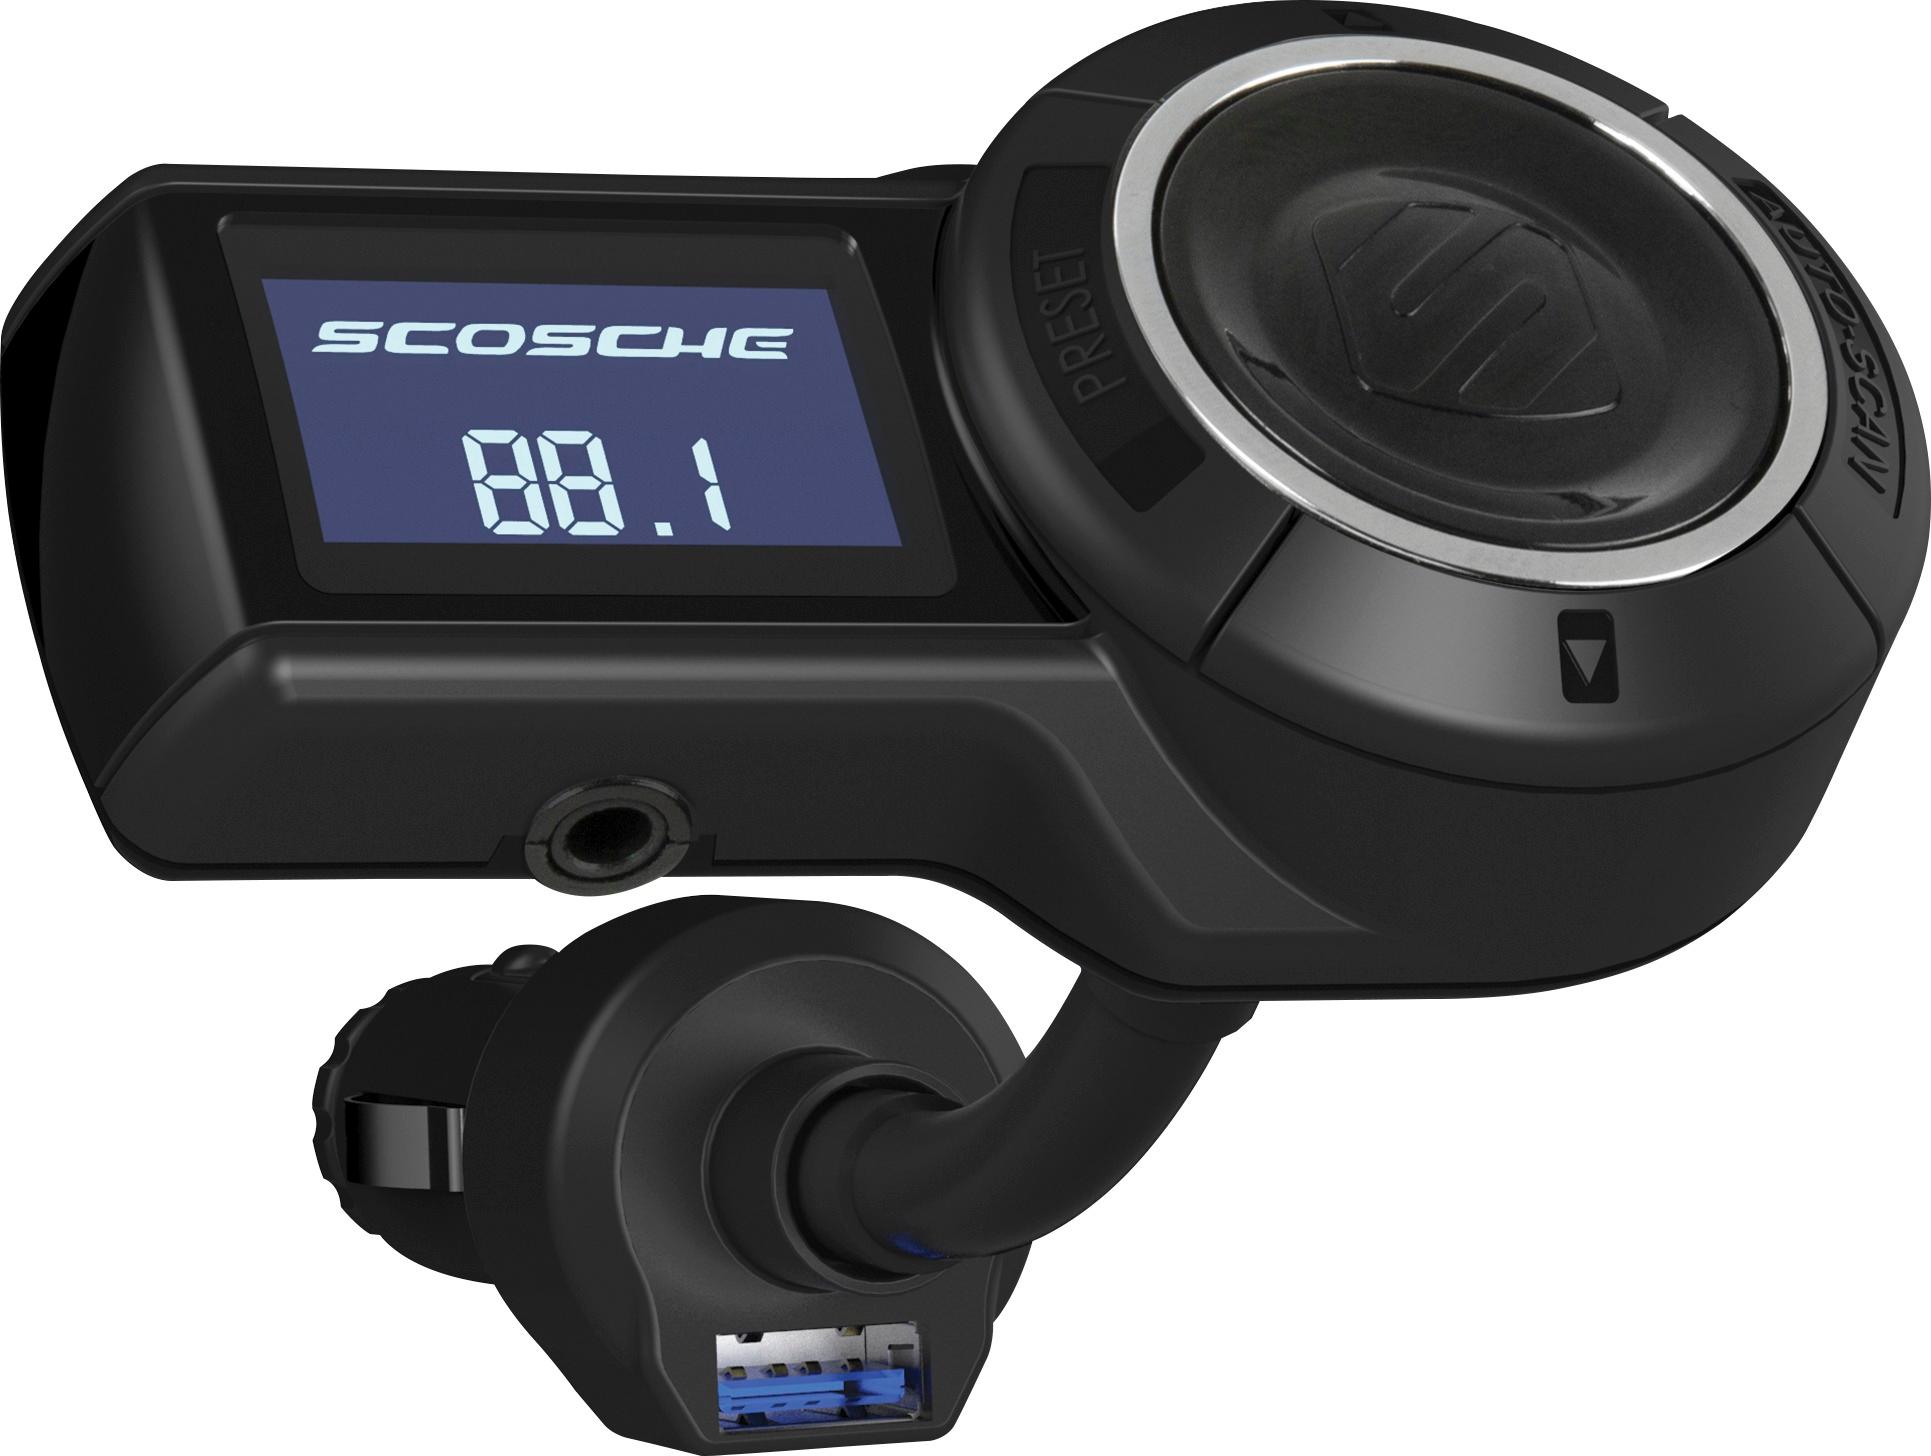 Syncing Sounds: Step-by-Step Guide On How To Pair Scosche FM Transmitter